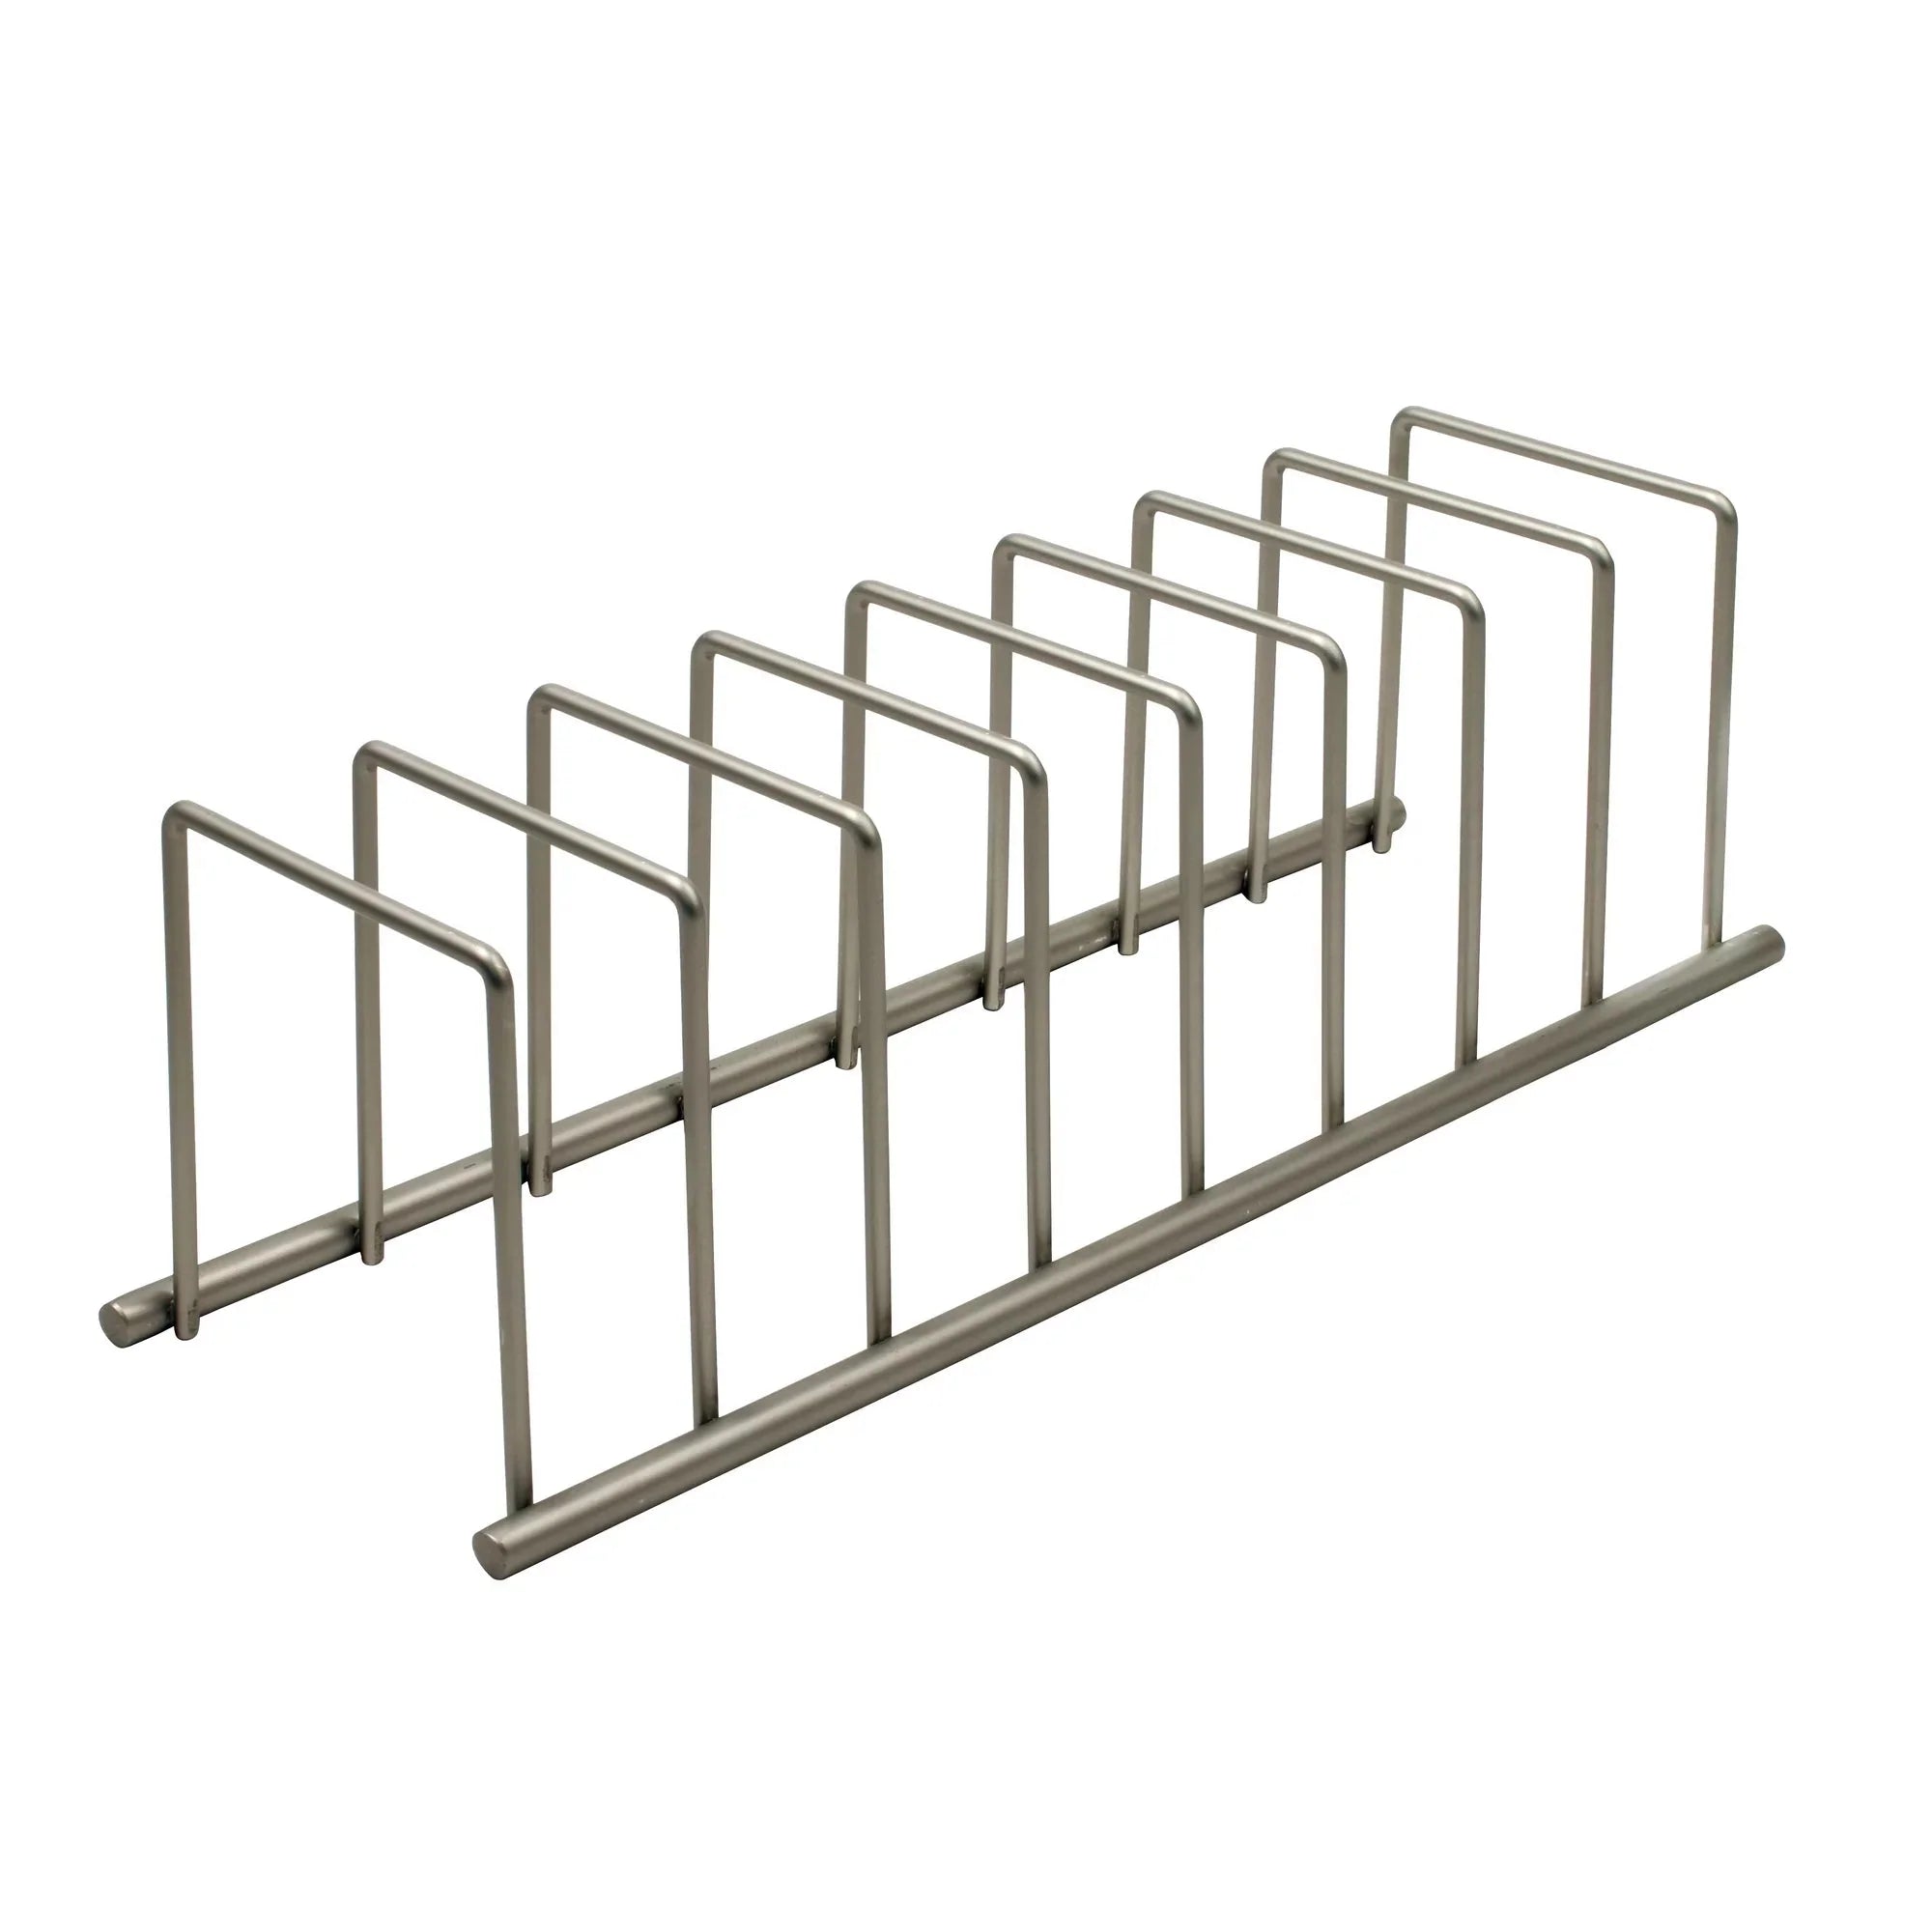 Wholesale prices with free shipping all over United States Spectrum Diversified Euro Steel Kitchen Lid and Dish Rack Holder Organizer, Satin Nickel - Steven Deals